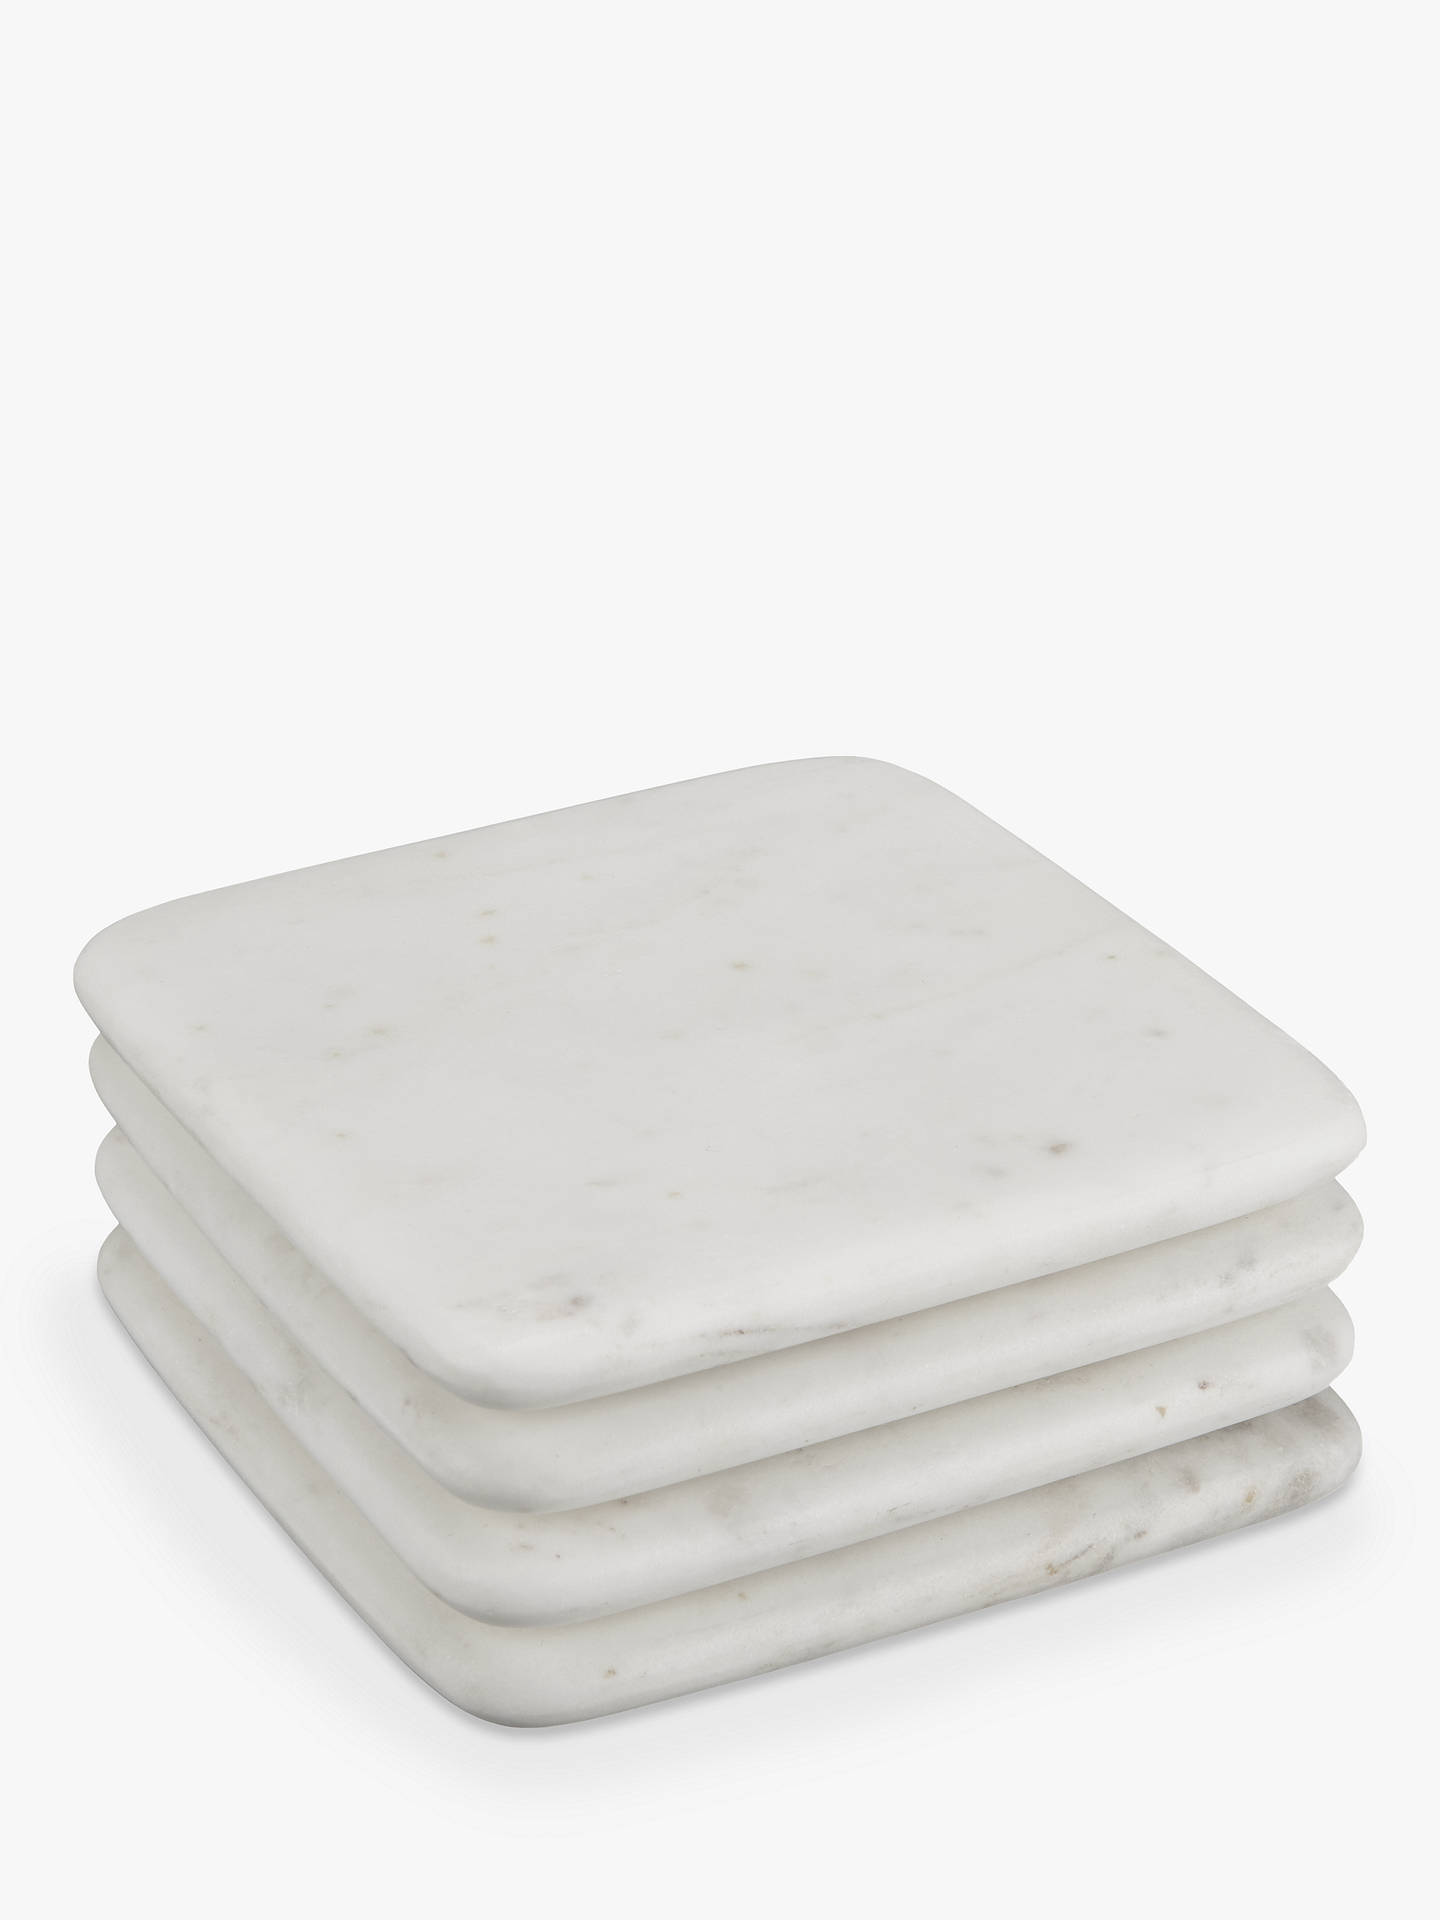 Croft Collection Arundel Square Marble Coasters, Set of 4 at John Lewis